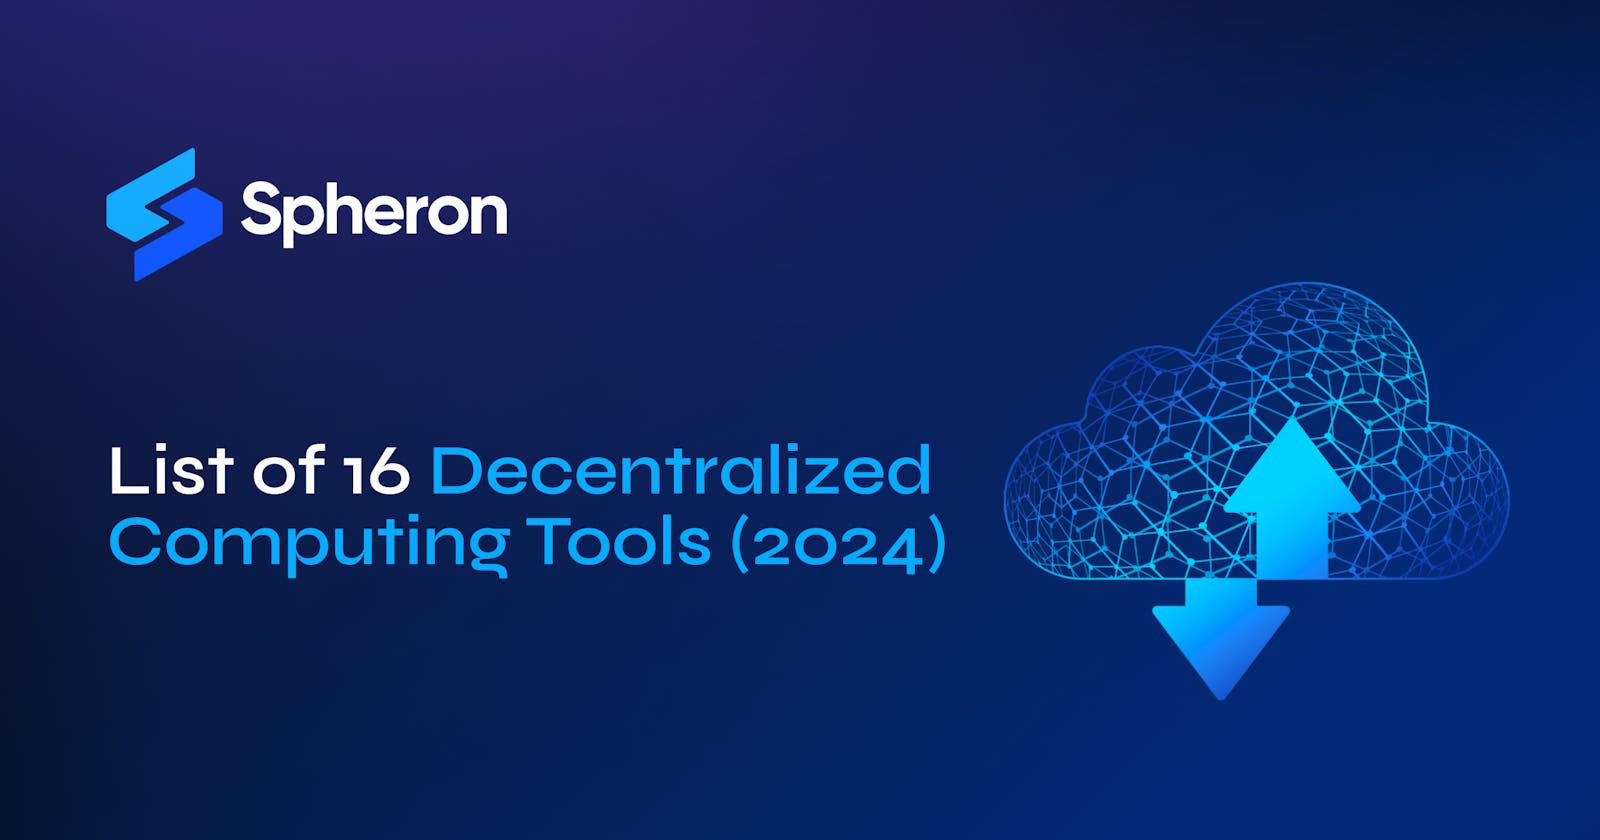 List of 16 Decentralized Computing Tools (2024)